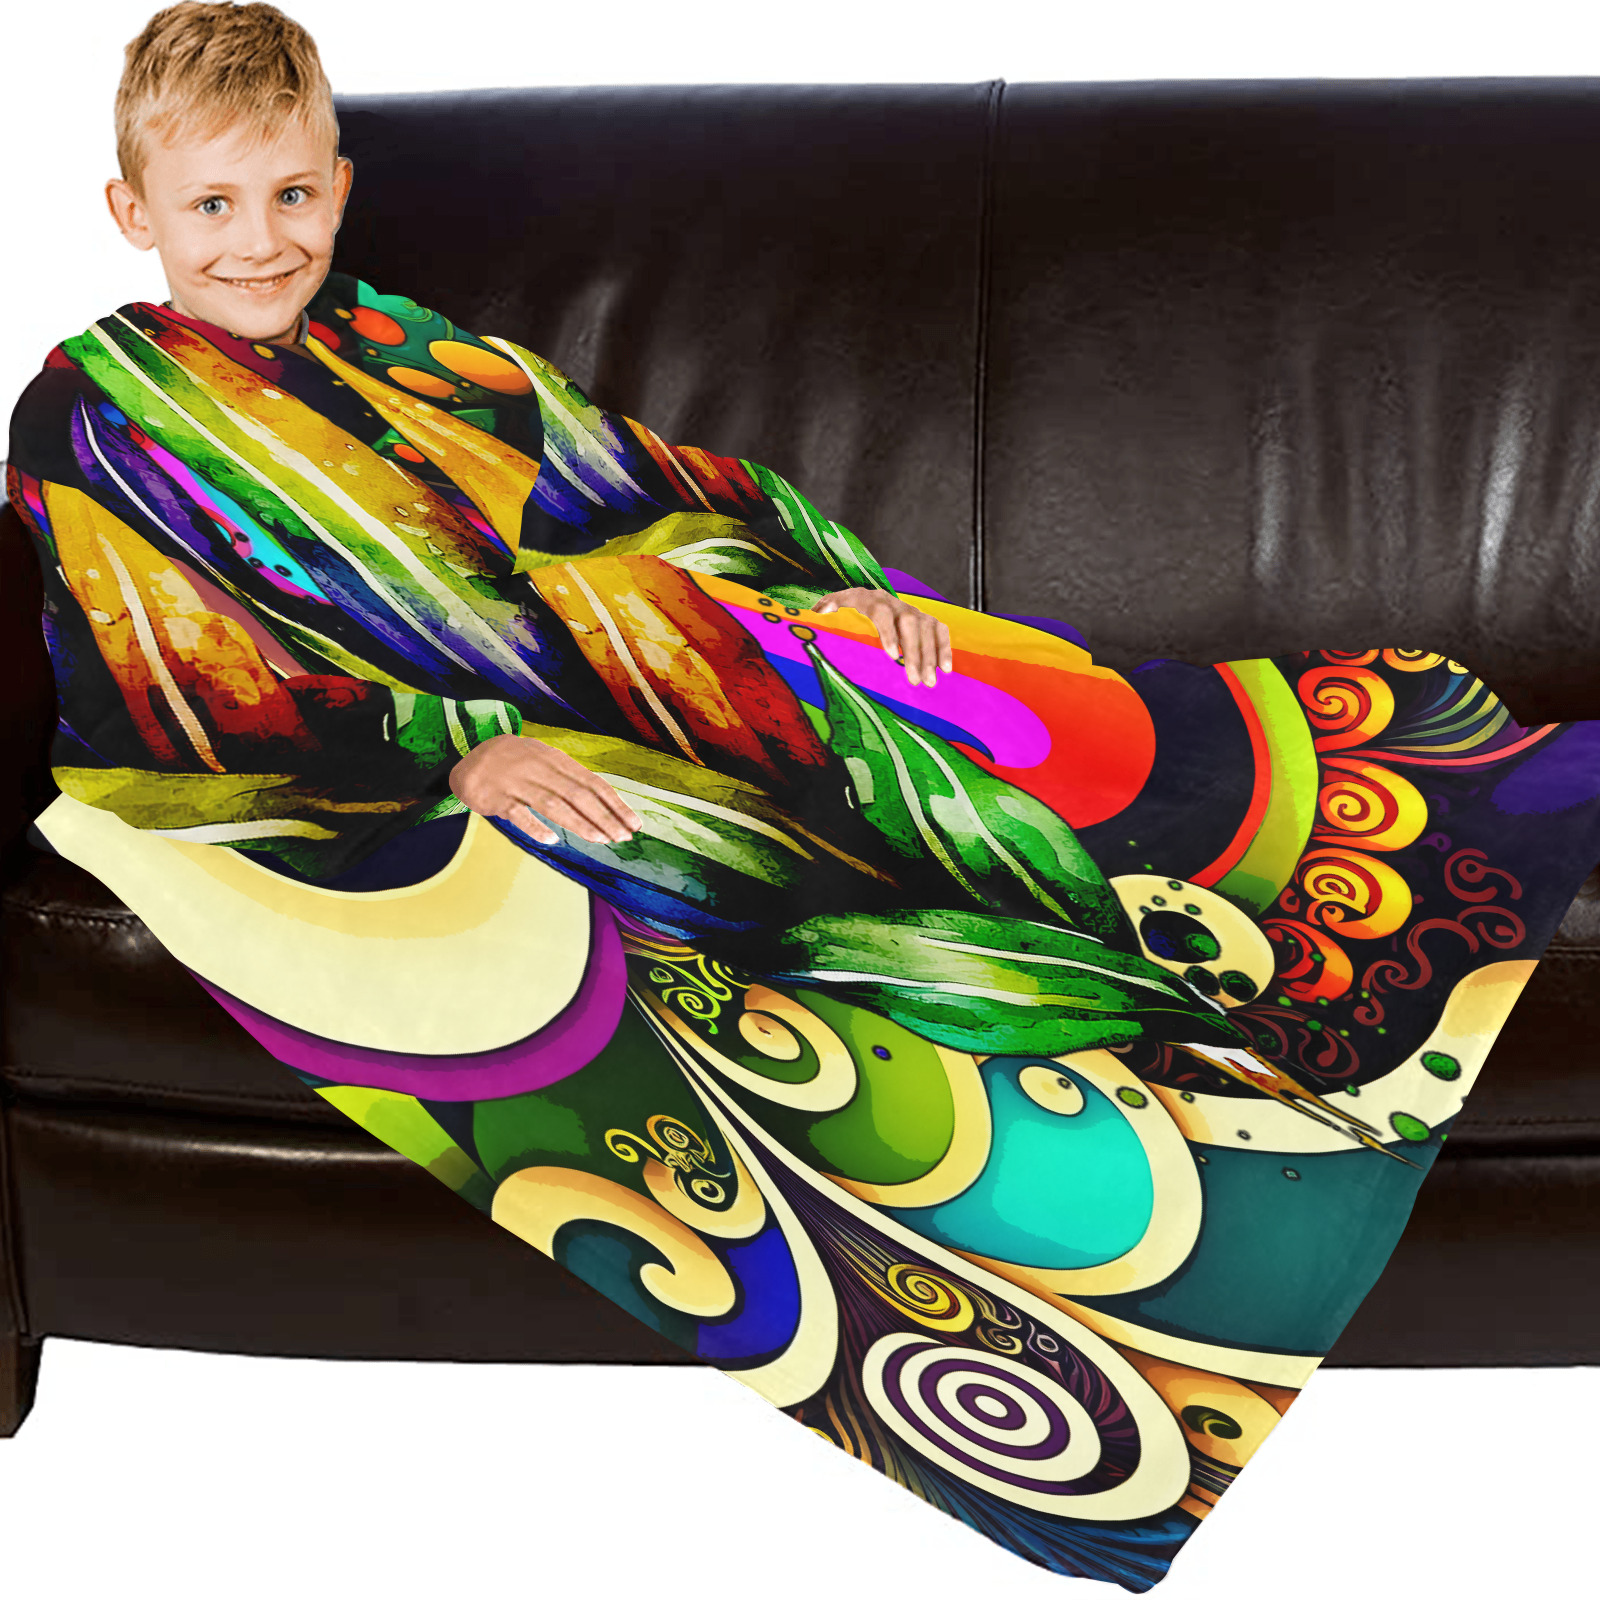 Mardi Gras Colorful New Orleans Blanket Robe with Sleeves for Kids